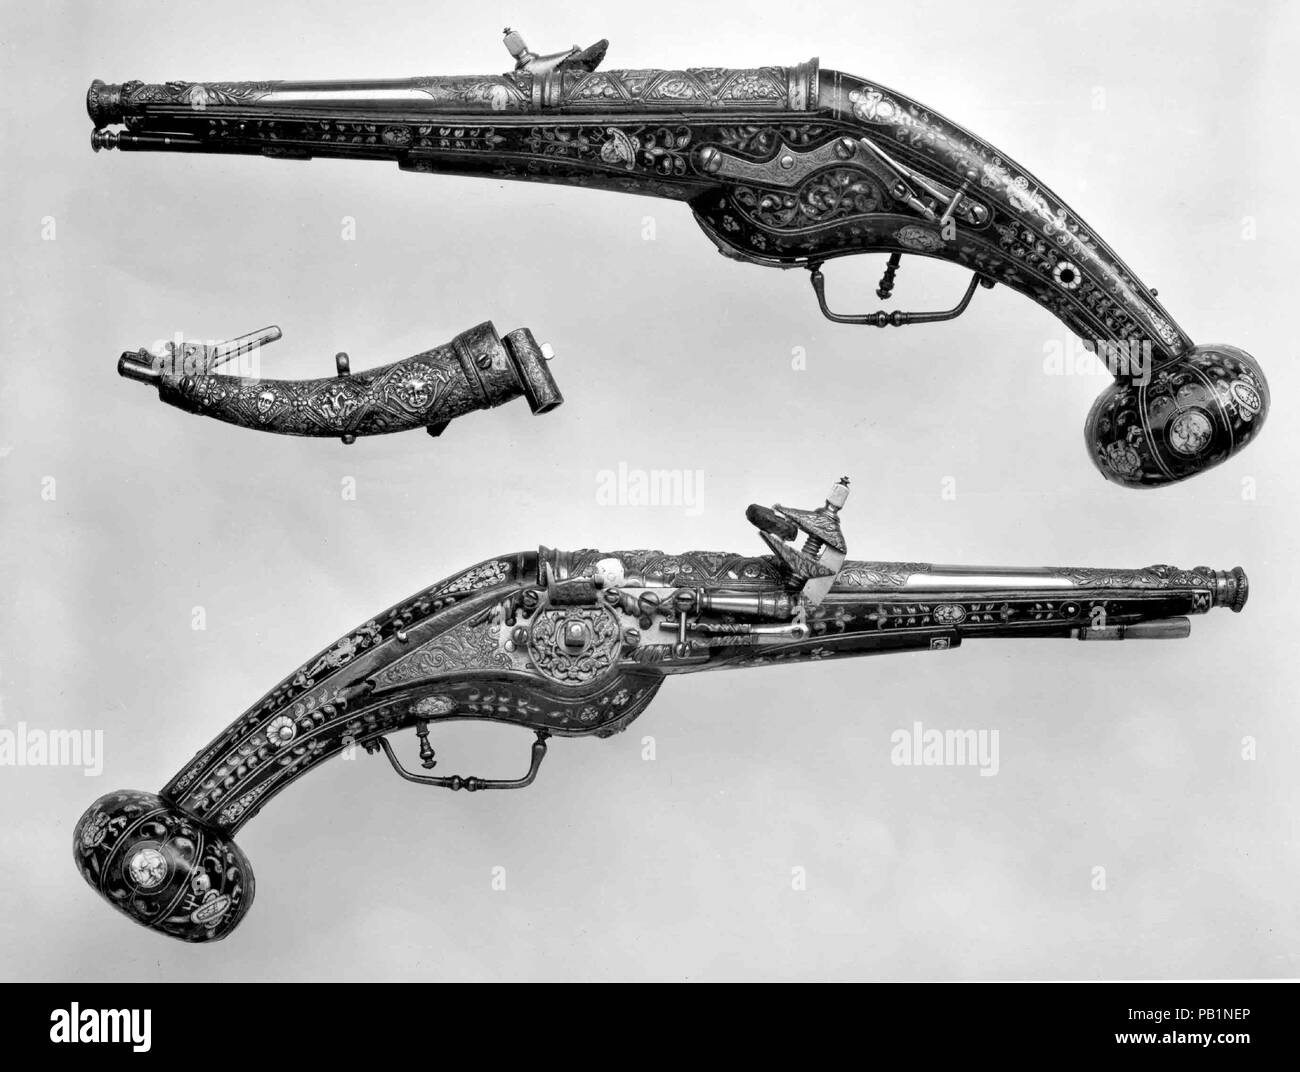 Pair of Wheellock Pistols with Matching Priming Flask/Spanner. Culture: French. Designer: Decoration on the stocks copied in part from engravings by Étienne Delaune (French, Orléans 1518/19-1583 Strasbourg). Dimensions: Cal. of each pistol, .44 in (11.18 mm); Wt. of 14.25.1433a: 4 lb. 2 oz. (1871 g); Wt. of 14.25.1433b: 4 lb. (1814 g); L. of each pistol, 20 1/8 in. (51.1 cm); L. of priming flask/spanner, 5 7/8 in. (14.91 cm). Date: ca. 1570-80.  These pistols are remarkable for the chiseled and gilt decoration of the barrels and locks, for the distinctive figural and floral inlay on the stocks Stock Photo